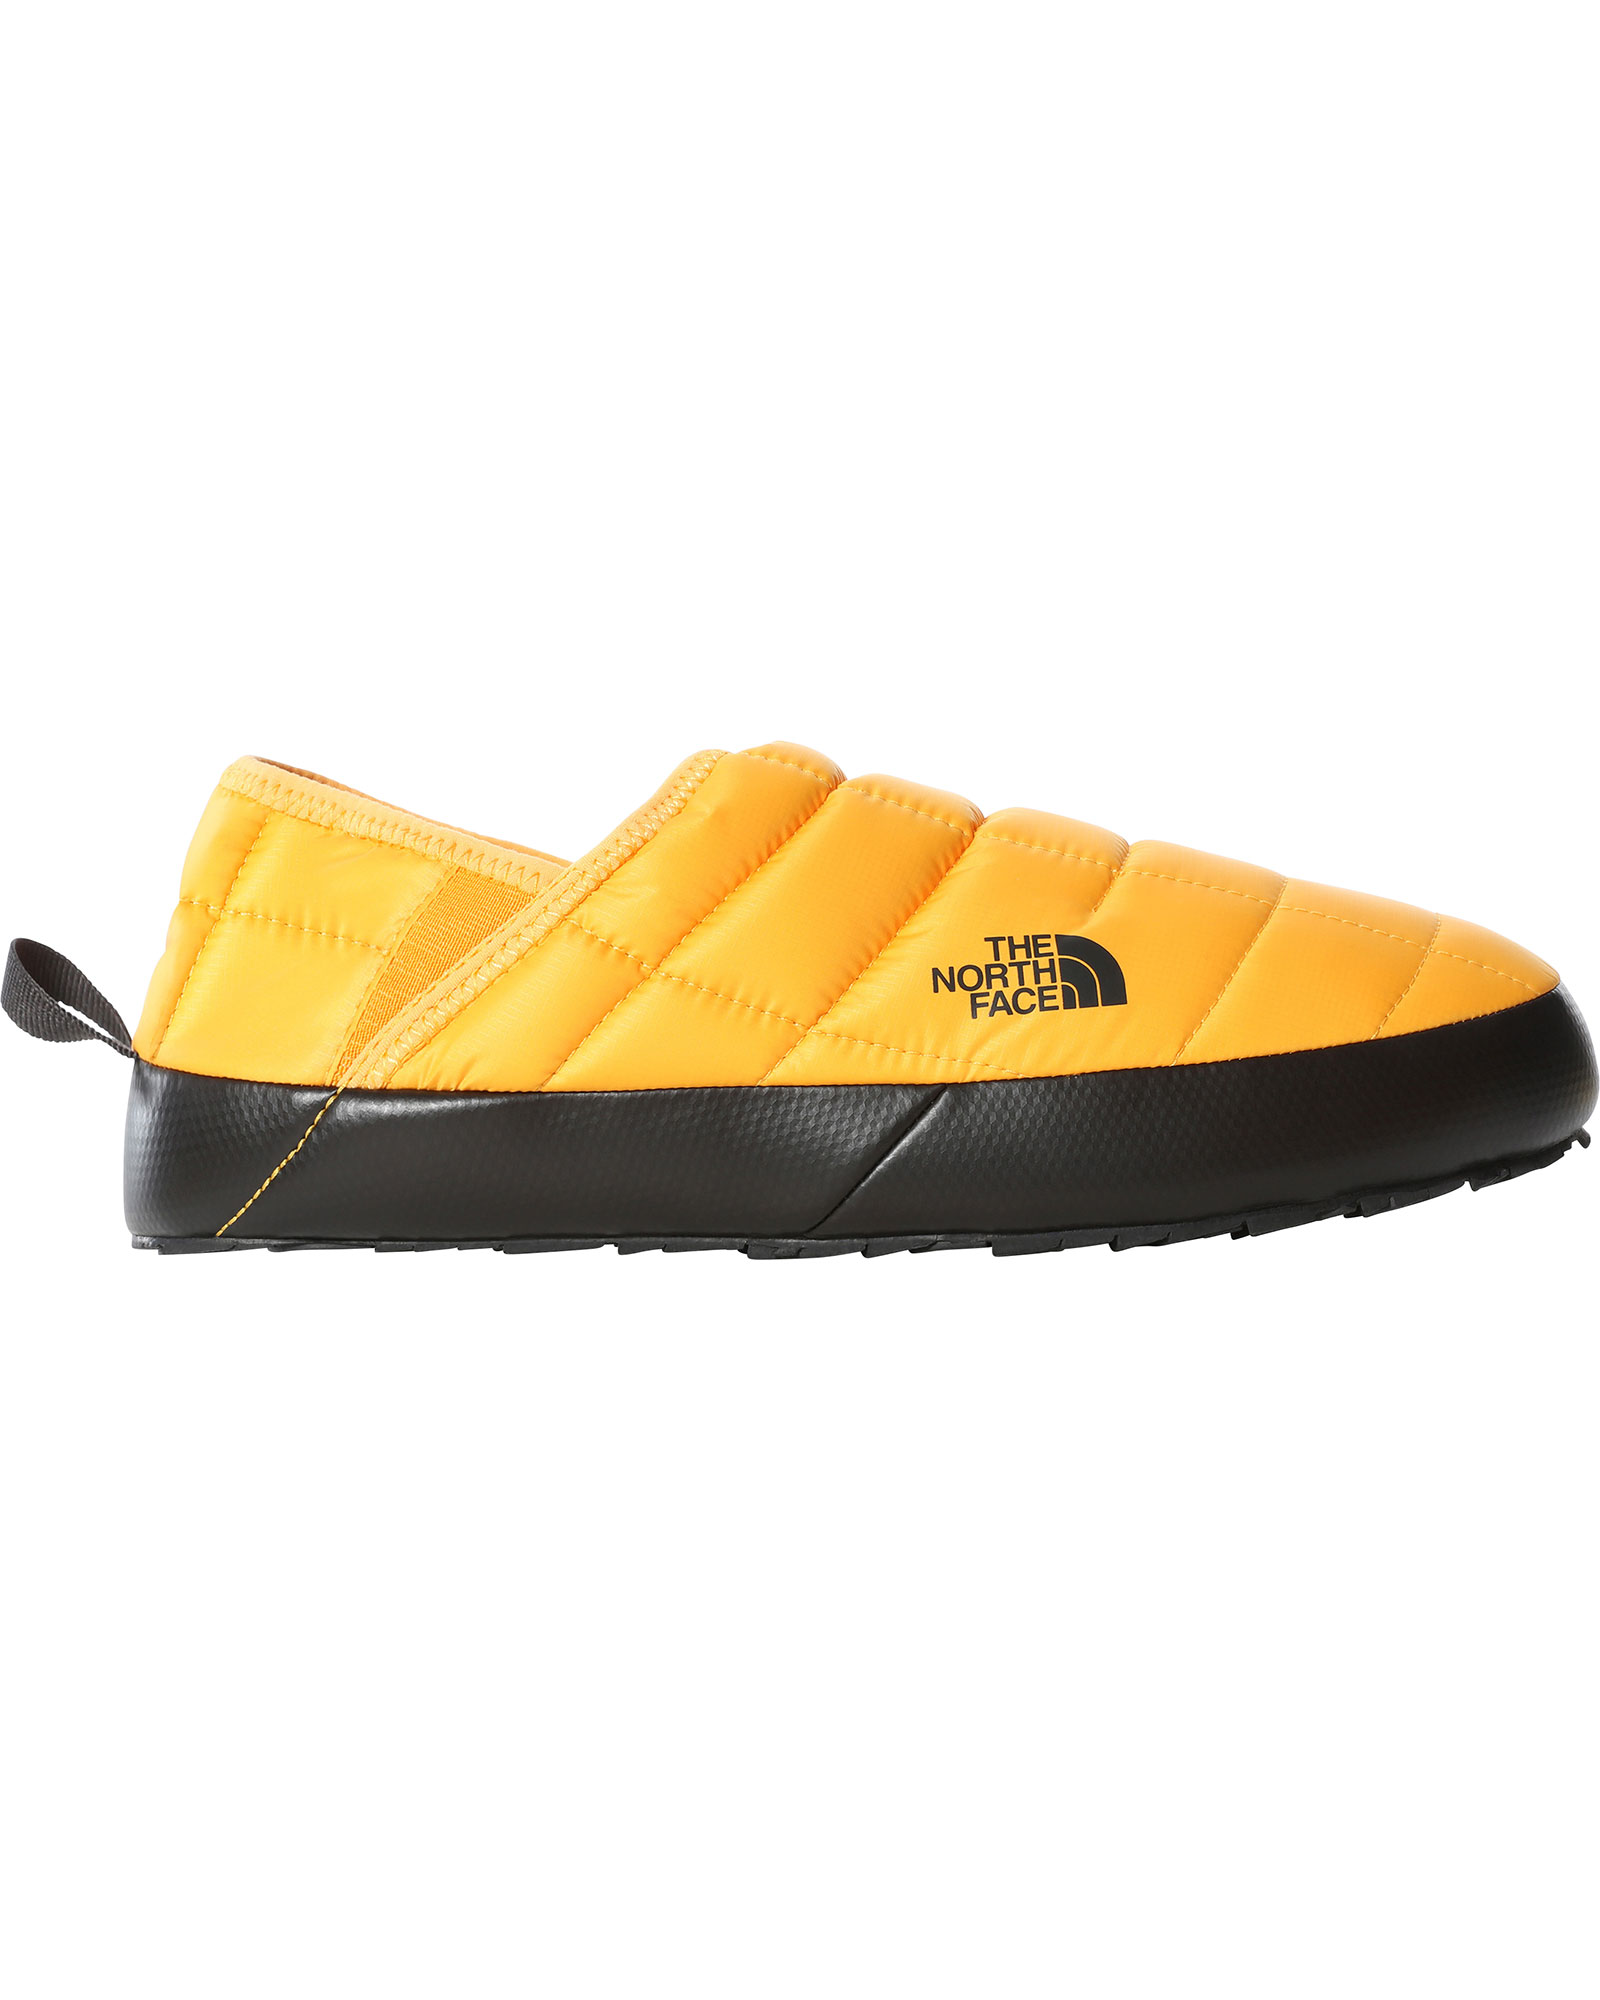 The North Face Men’s ThermoBall V Traction Mules - Summit Gold/TNF Black UK 7